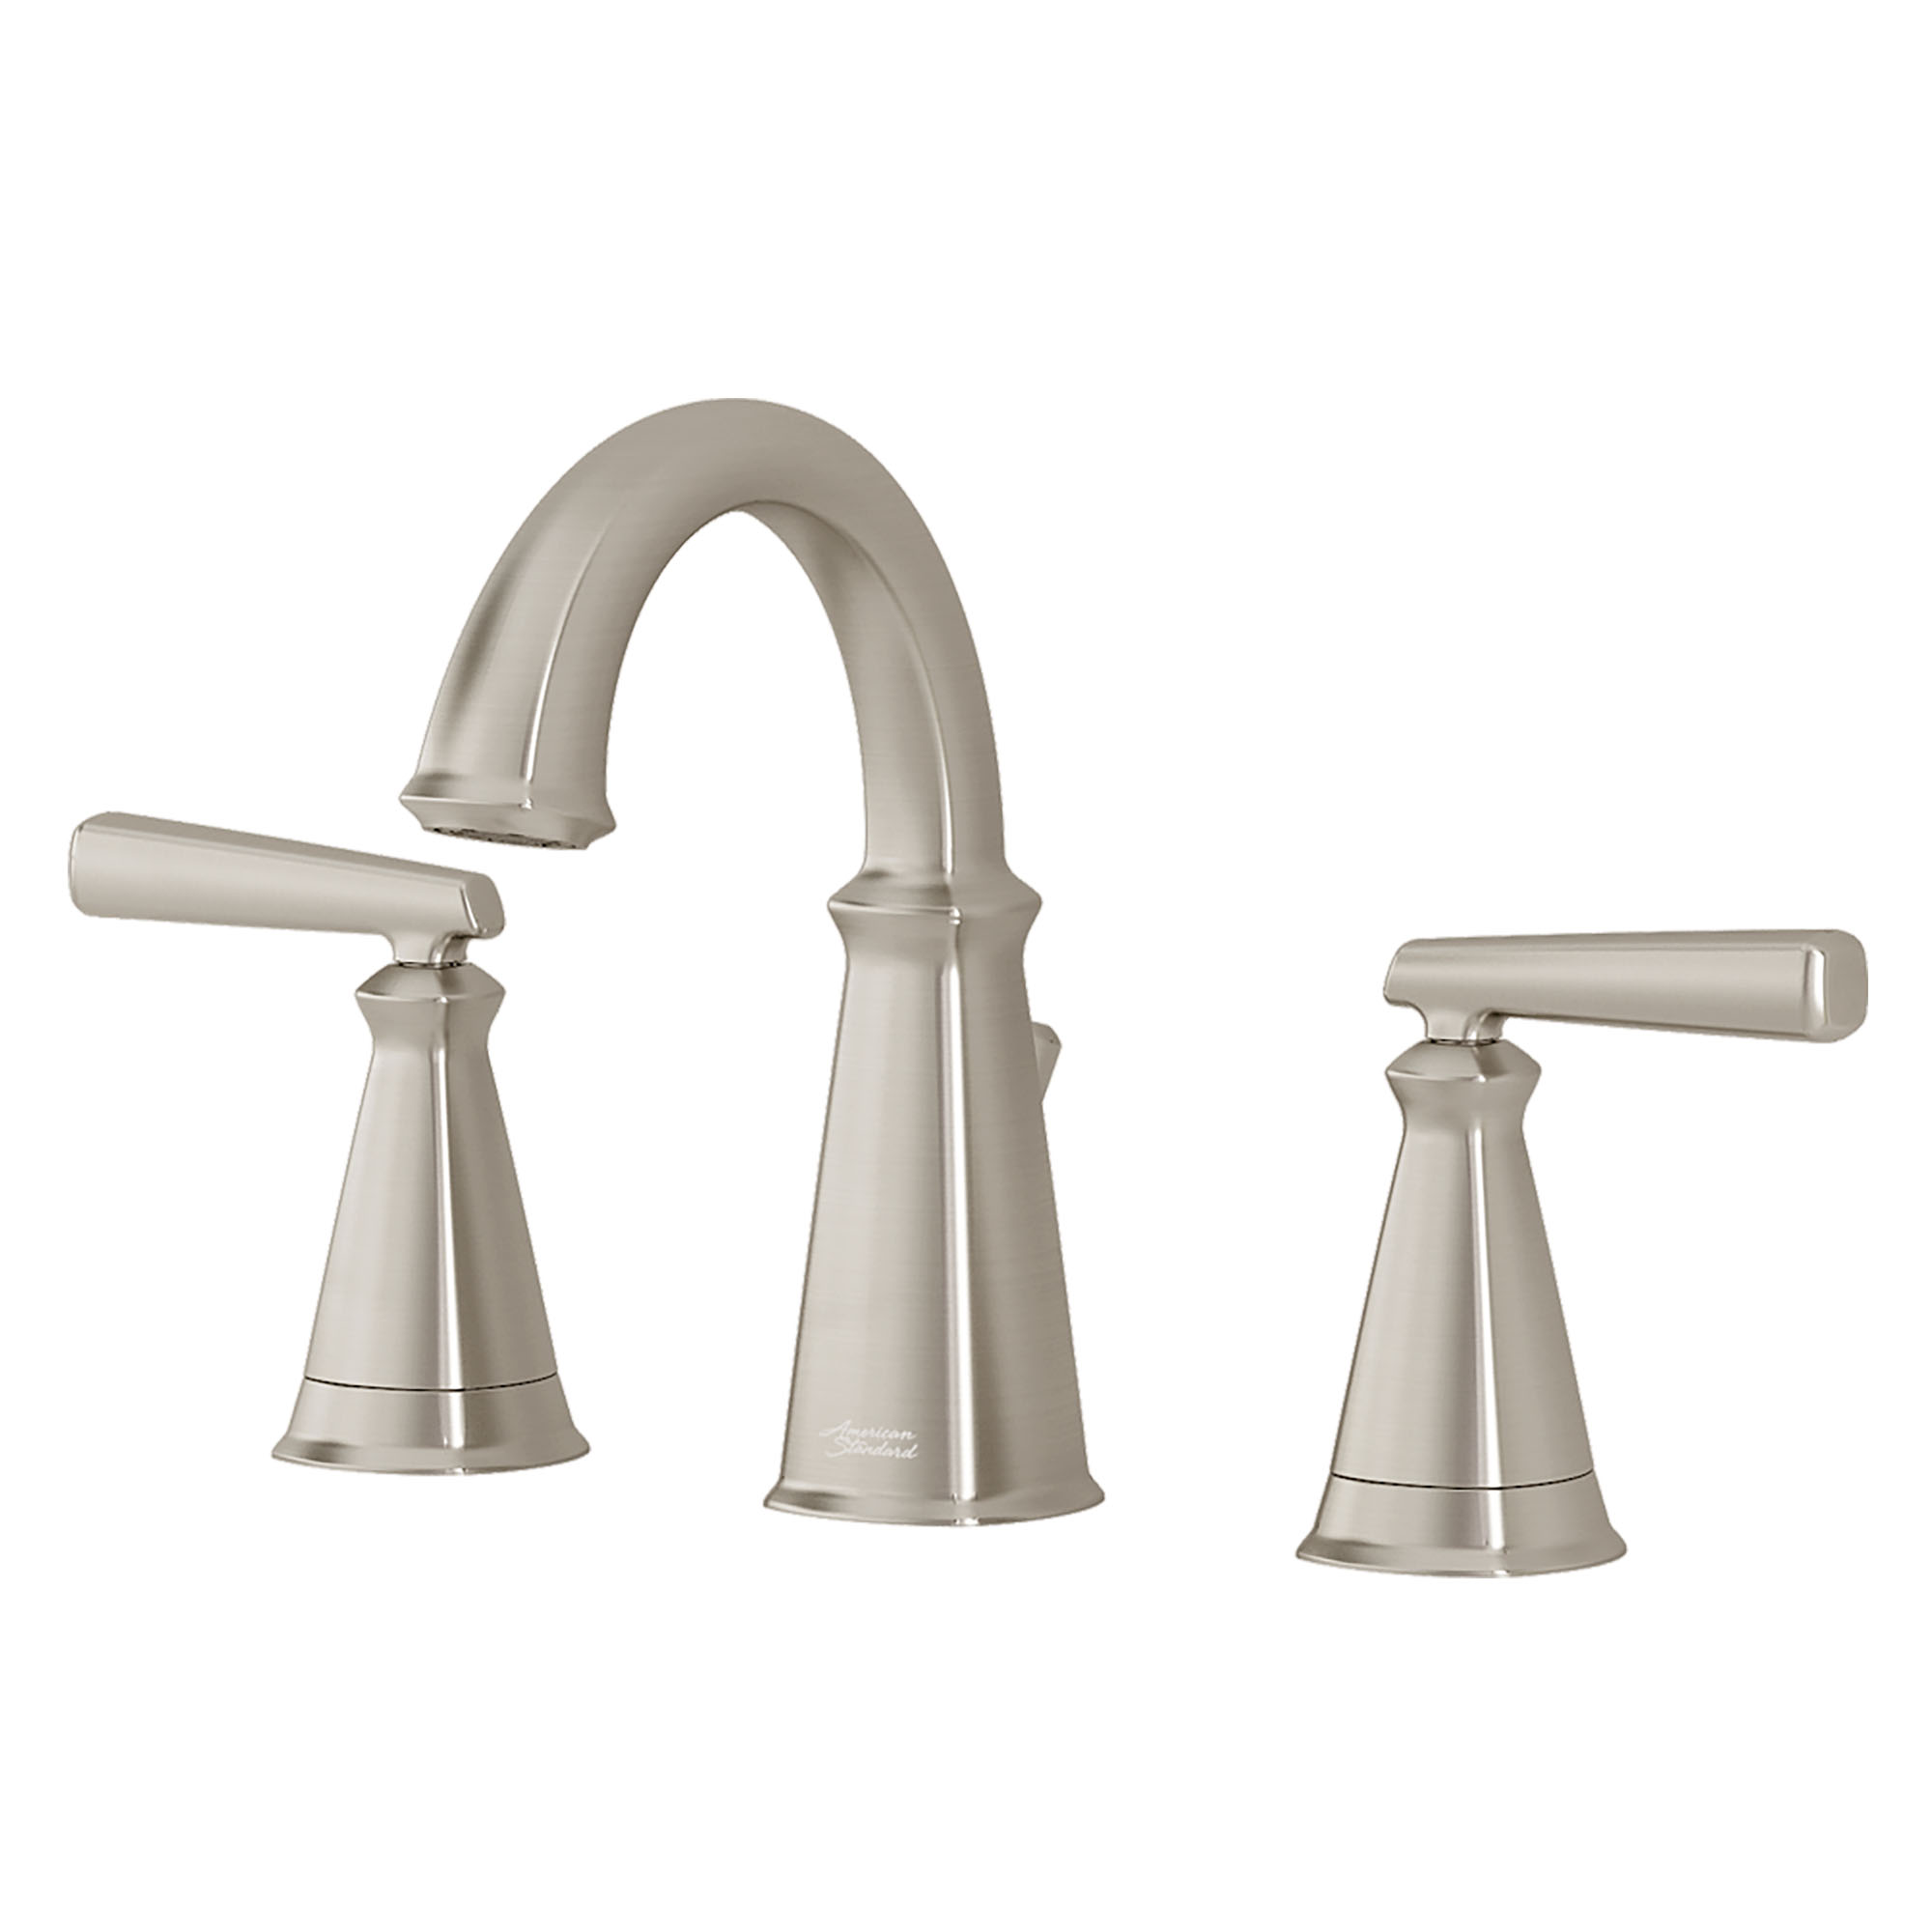 Kirkdale 8-In. Widespread 2-Handle Bathroom Faucet 1.2 GPM with Lever Handles